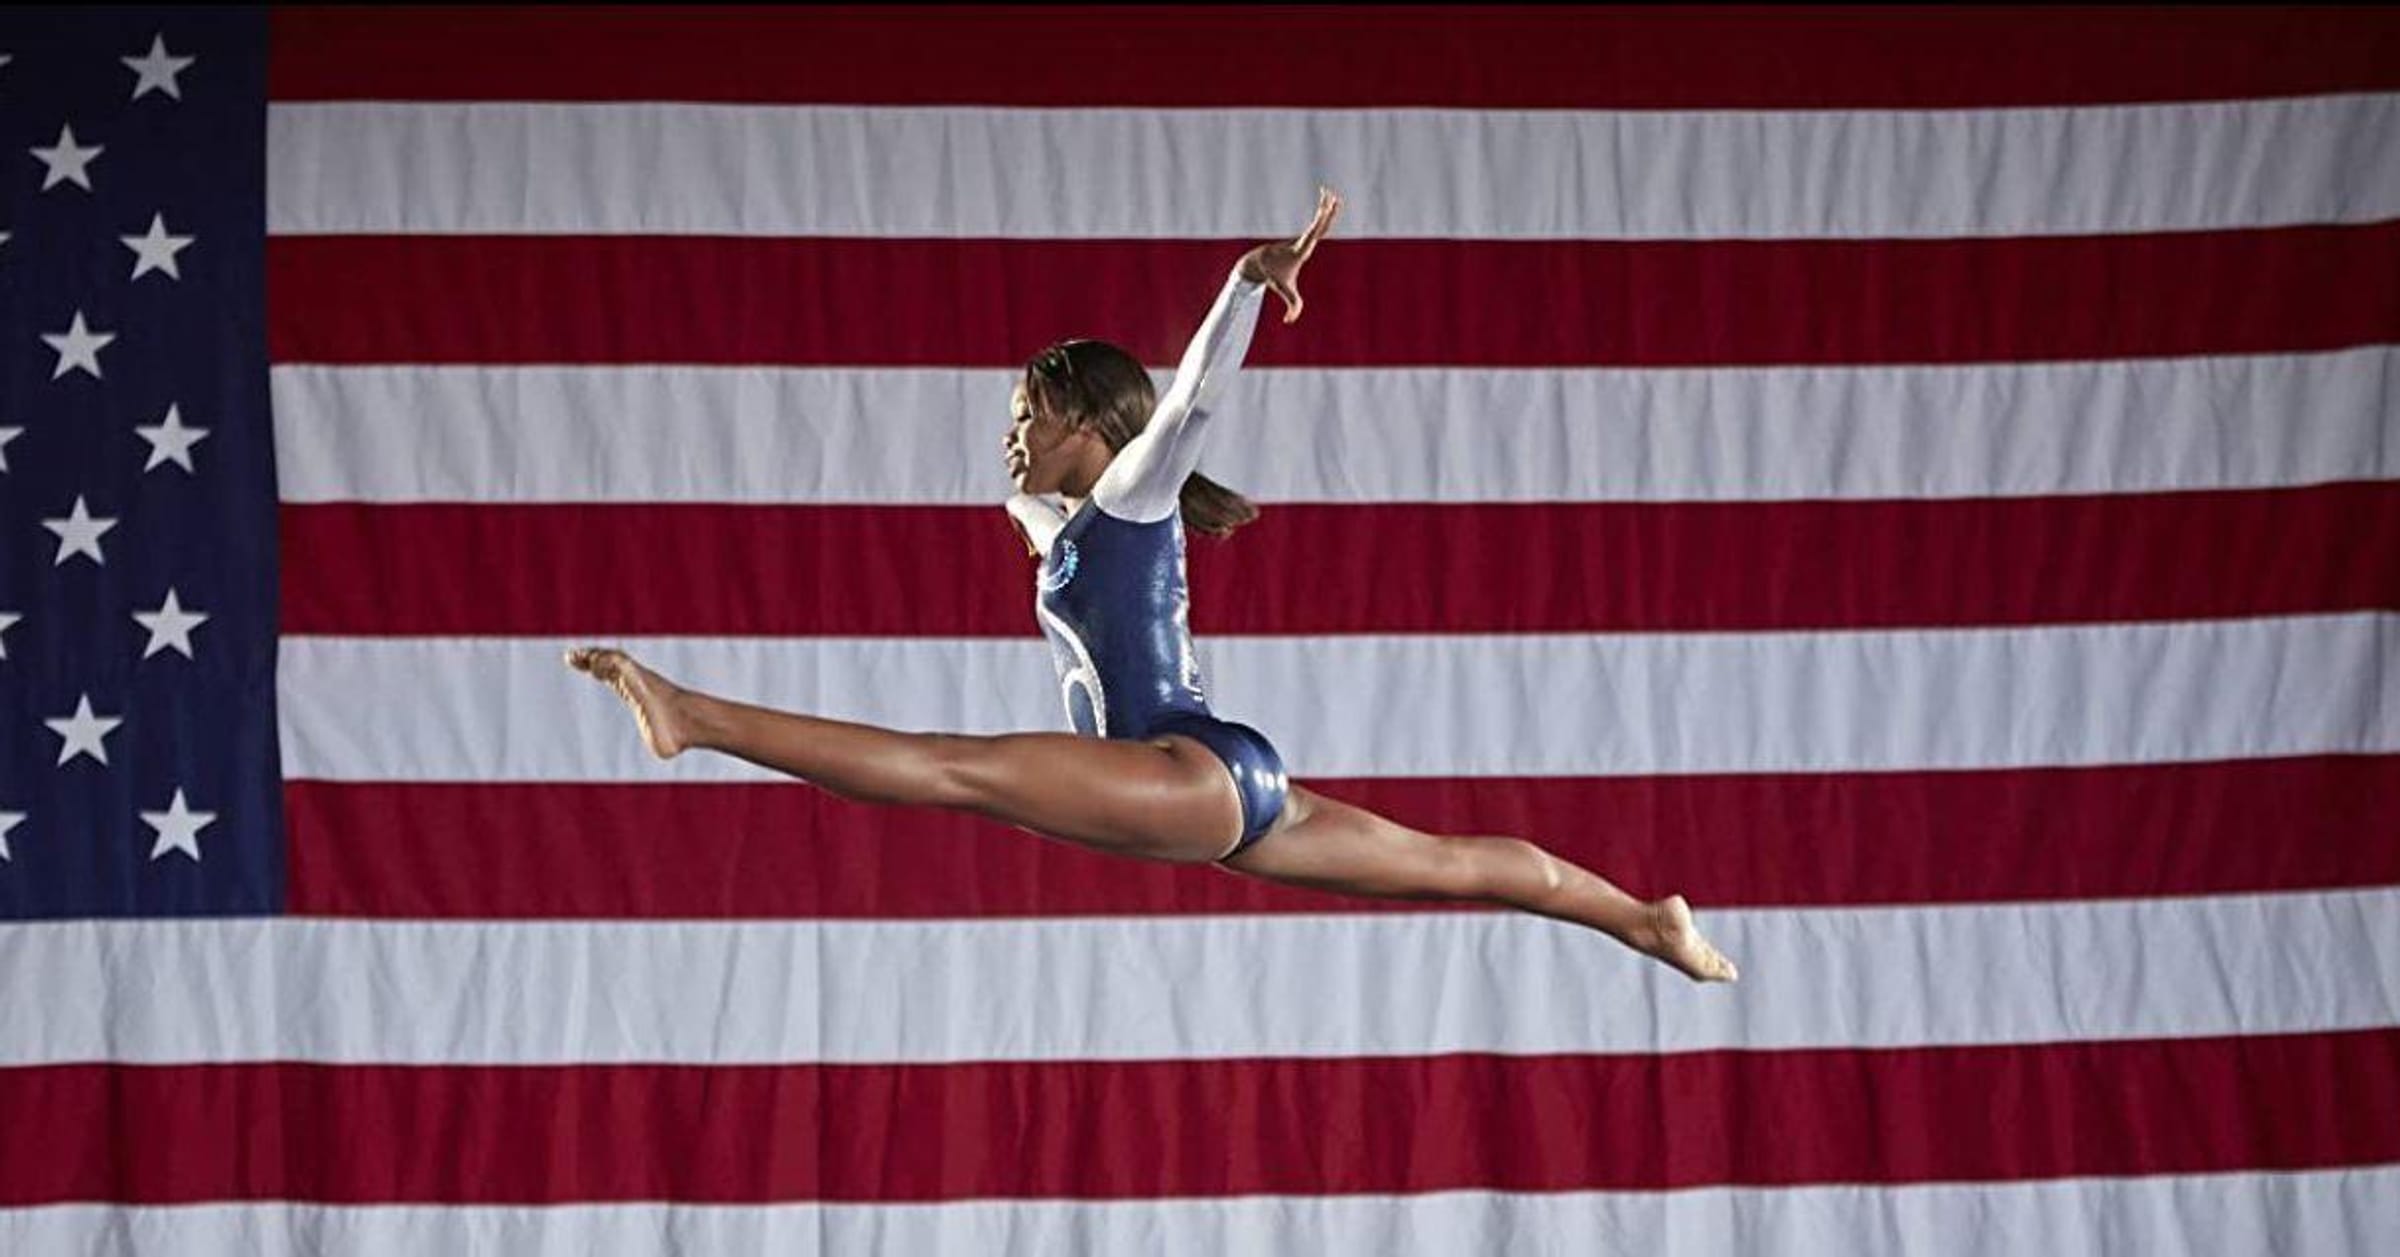 Up in the Air, Gymnastics, FULL Documentary